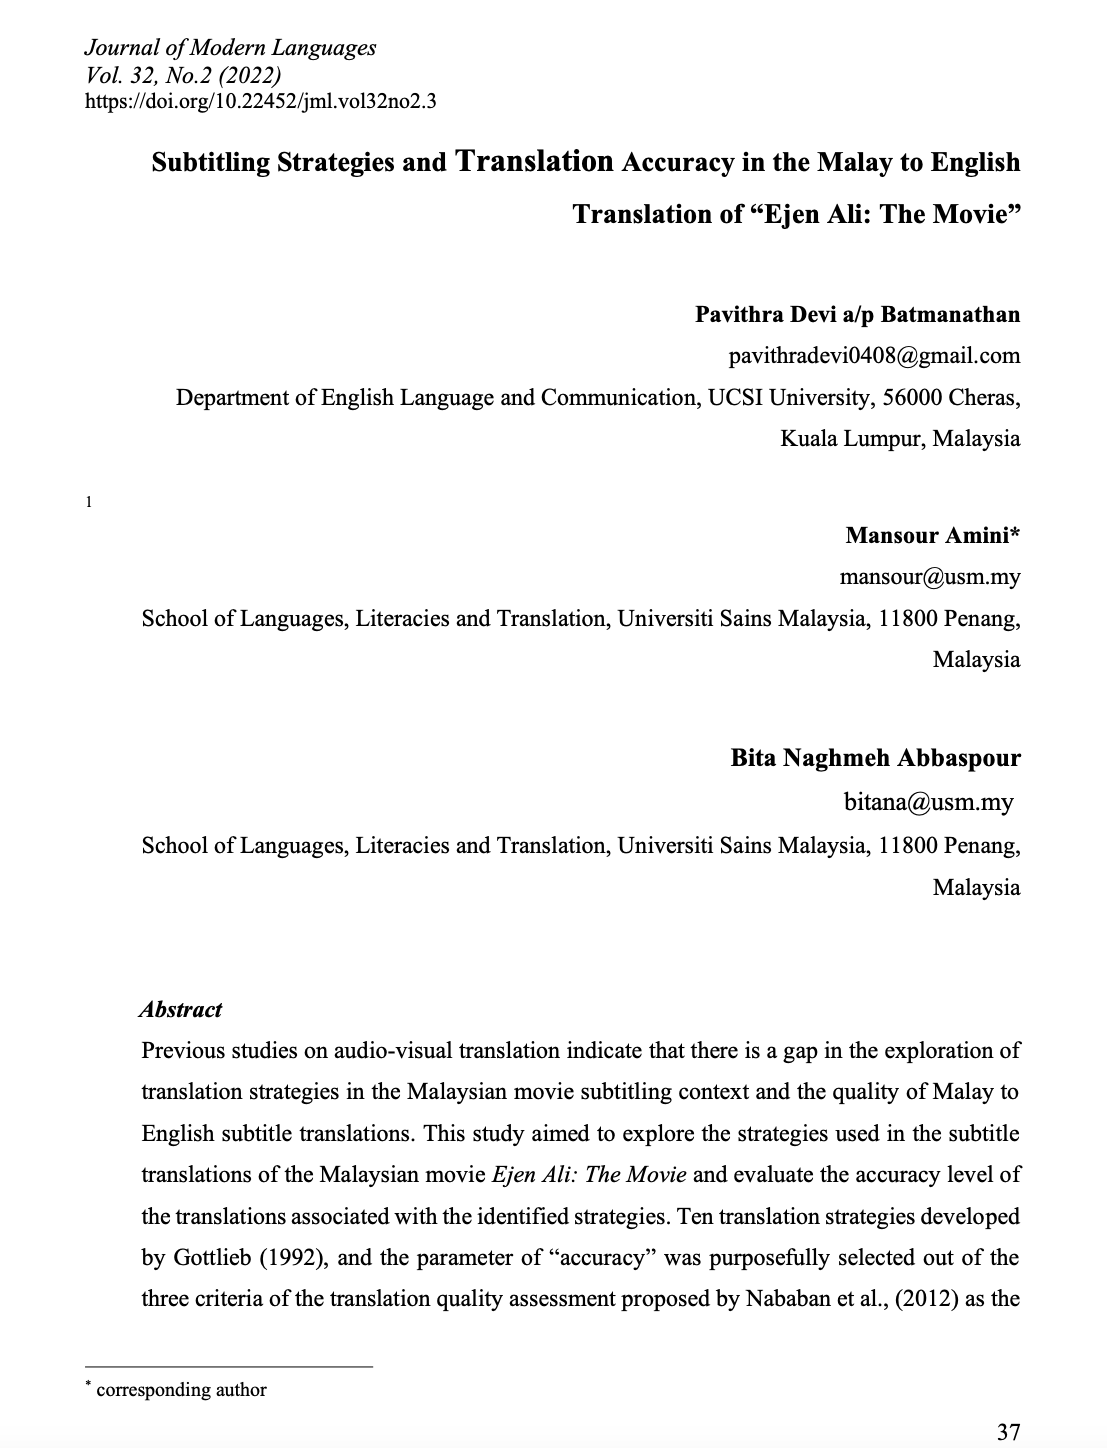 Article 3_Subtitling Strategies and Translation Accuracy in the Malay to English Translation of “Ejen Ali: The Movie”